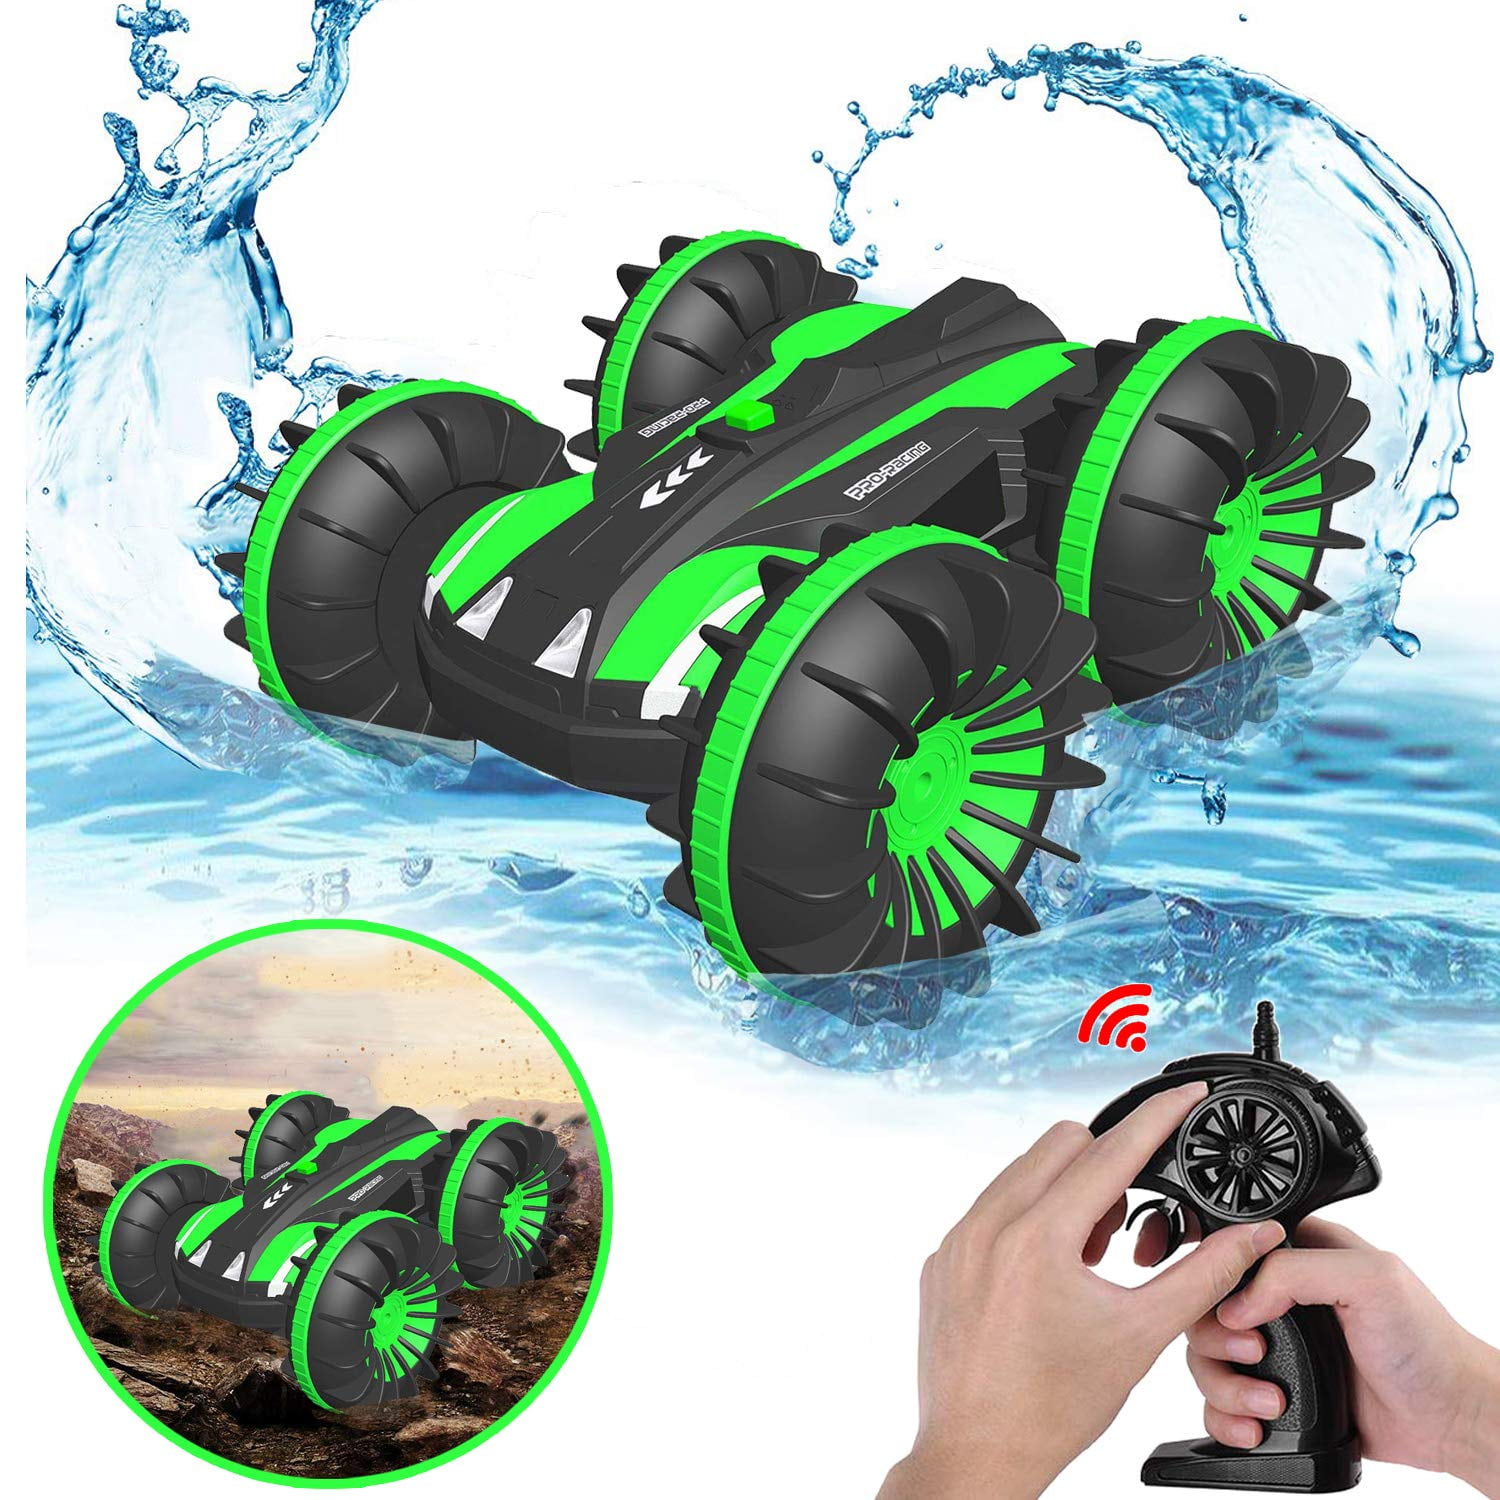 Green Remote Control Car Boat Truck 4WD 2.4Ghz Land Water 2 in 1 RC Toy Car Multifunction Waterproof Stunt 1:24 Remote Vehicle with Rotate 360 Electric Car Toy by OUTTUO